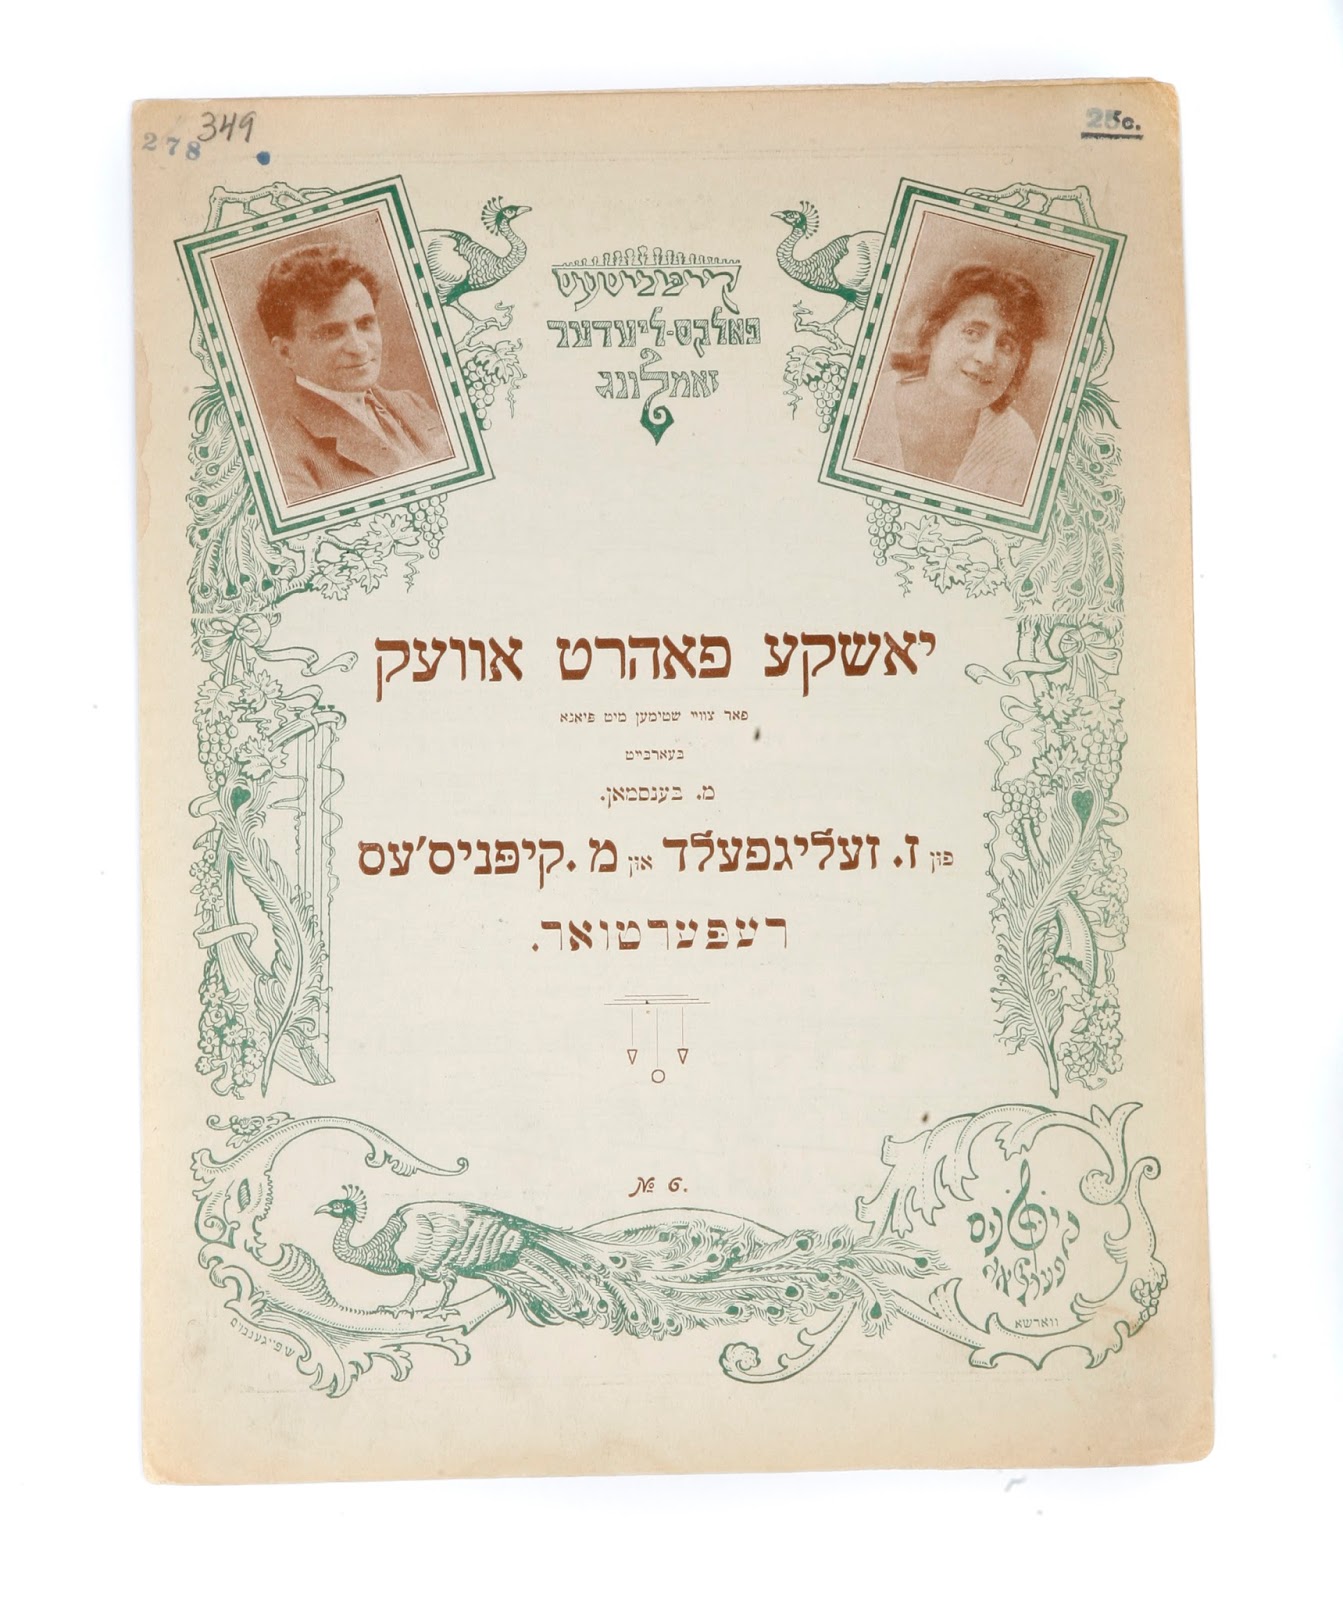 A sheet with writing in Hebrew with an image of a man and woman